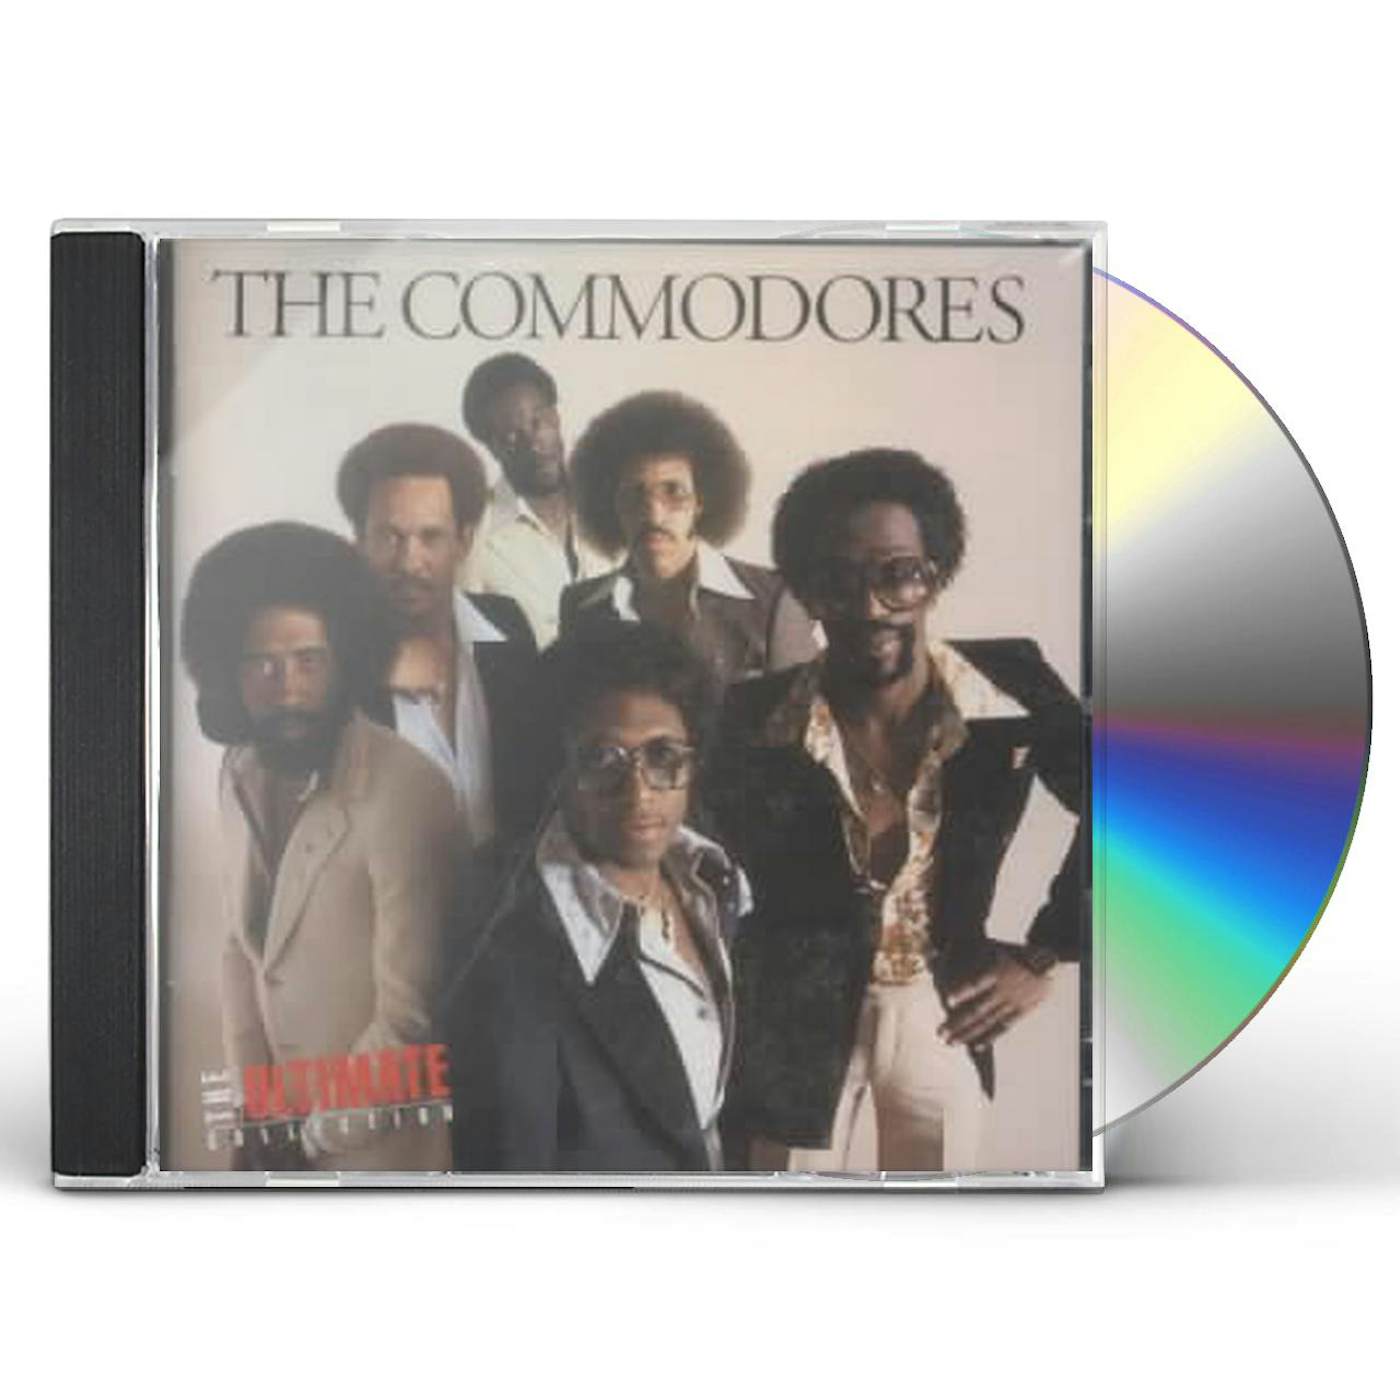 Commodores ULTIMATE COLLECTION CD